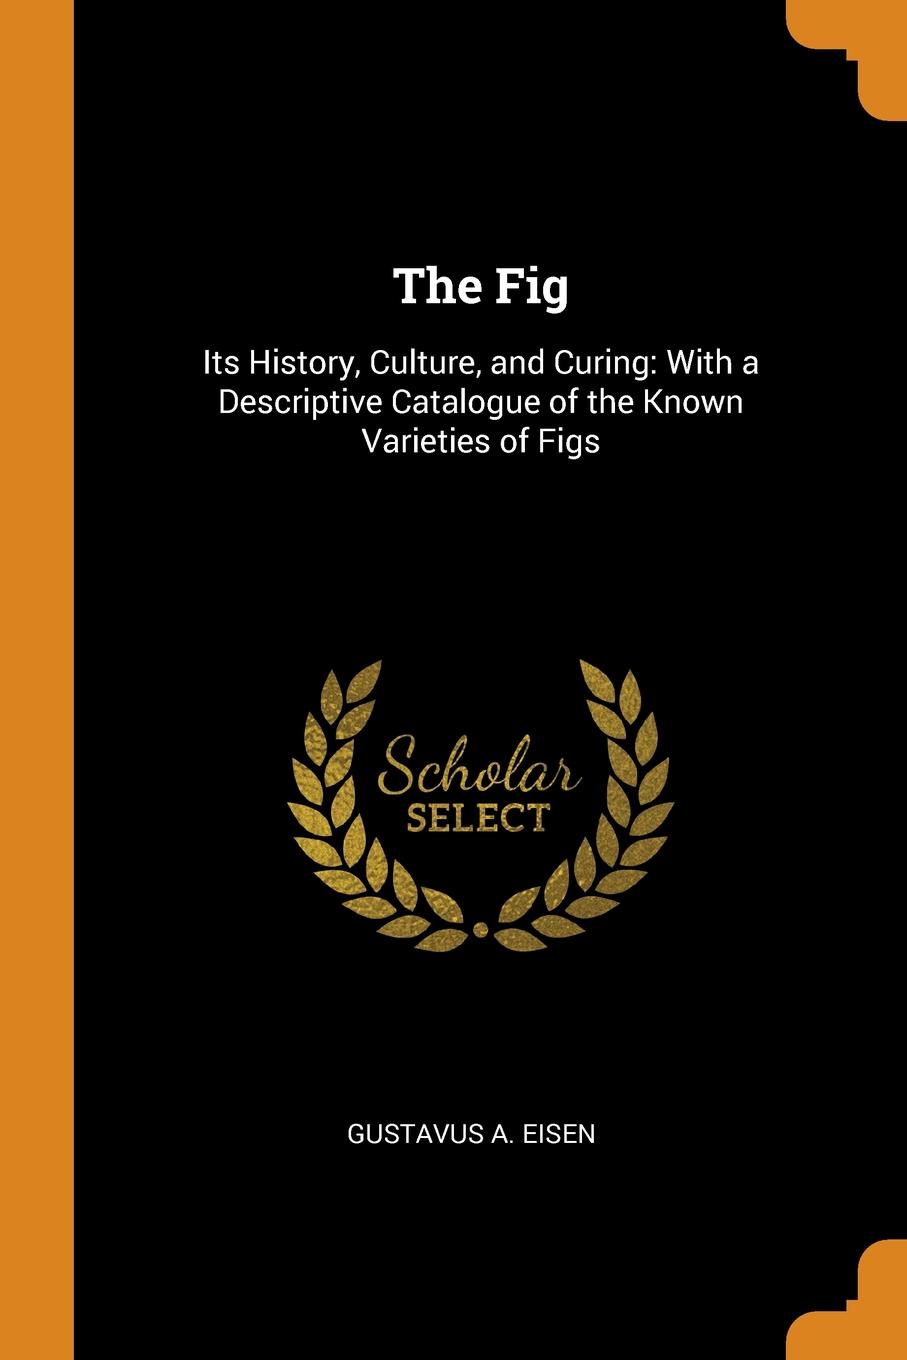 The Fig. Its History, Culture, and Curing: With a Descriptive Catalogue of the Known Varieties of Figs